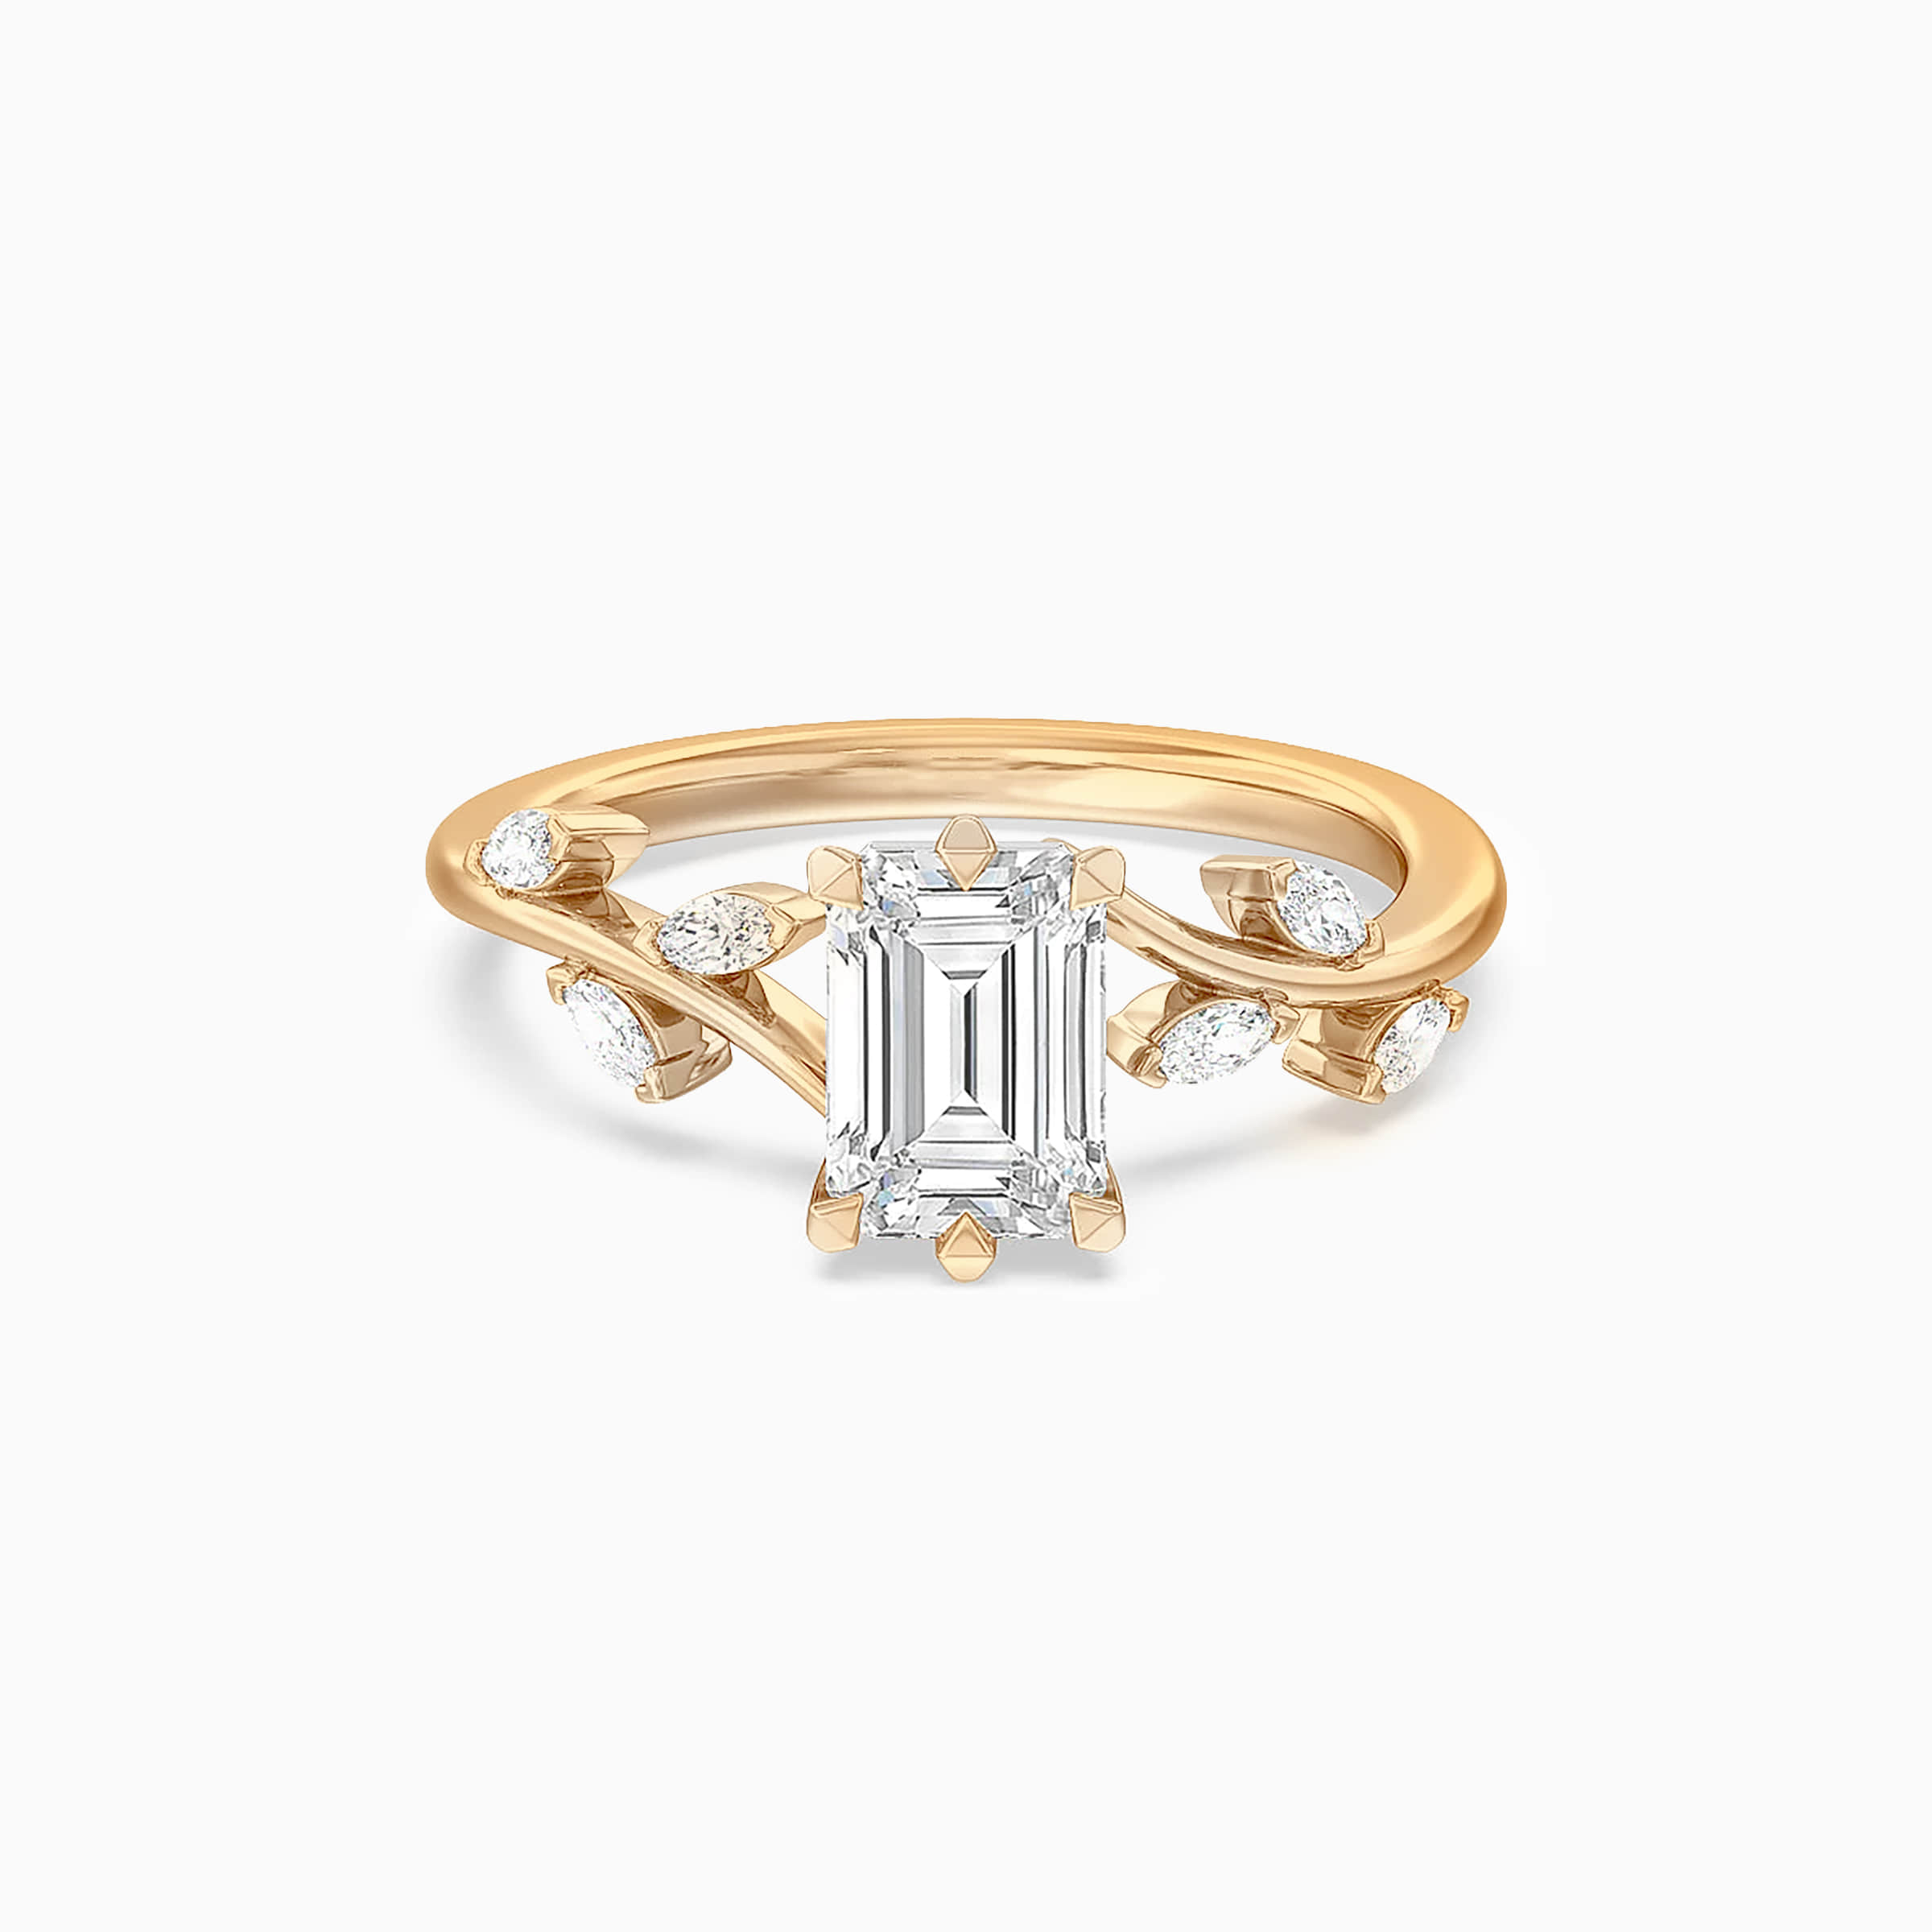 Darry Ring emerald cut vine engagement ring yellow gold